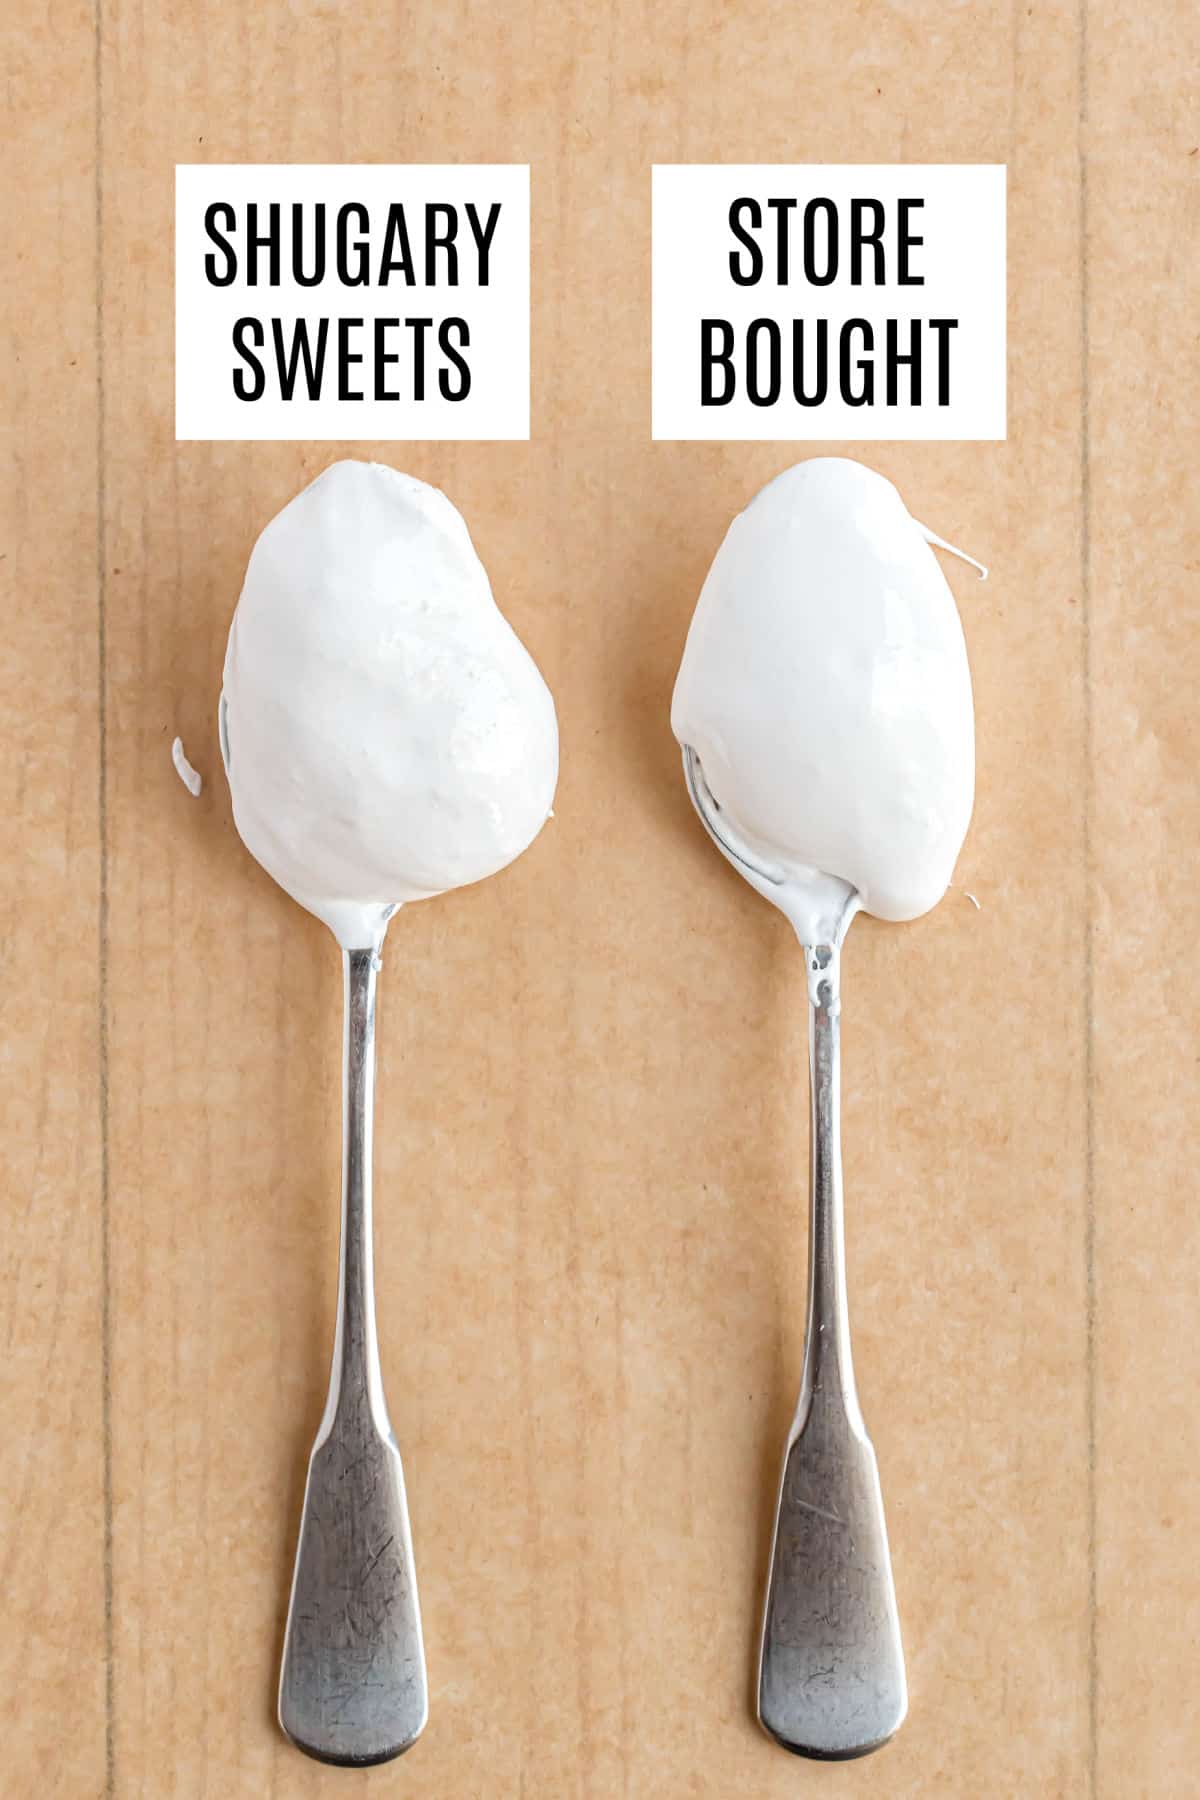 Two spoons comparing homemade marshmallow cream and store bought Fluff.